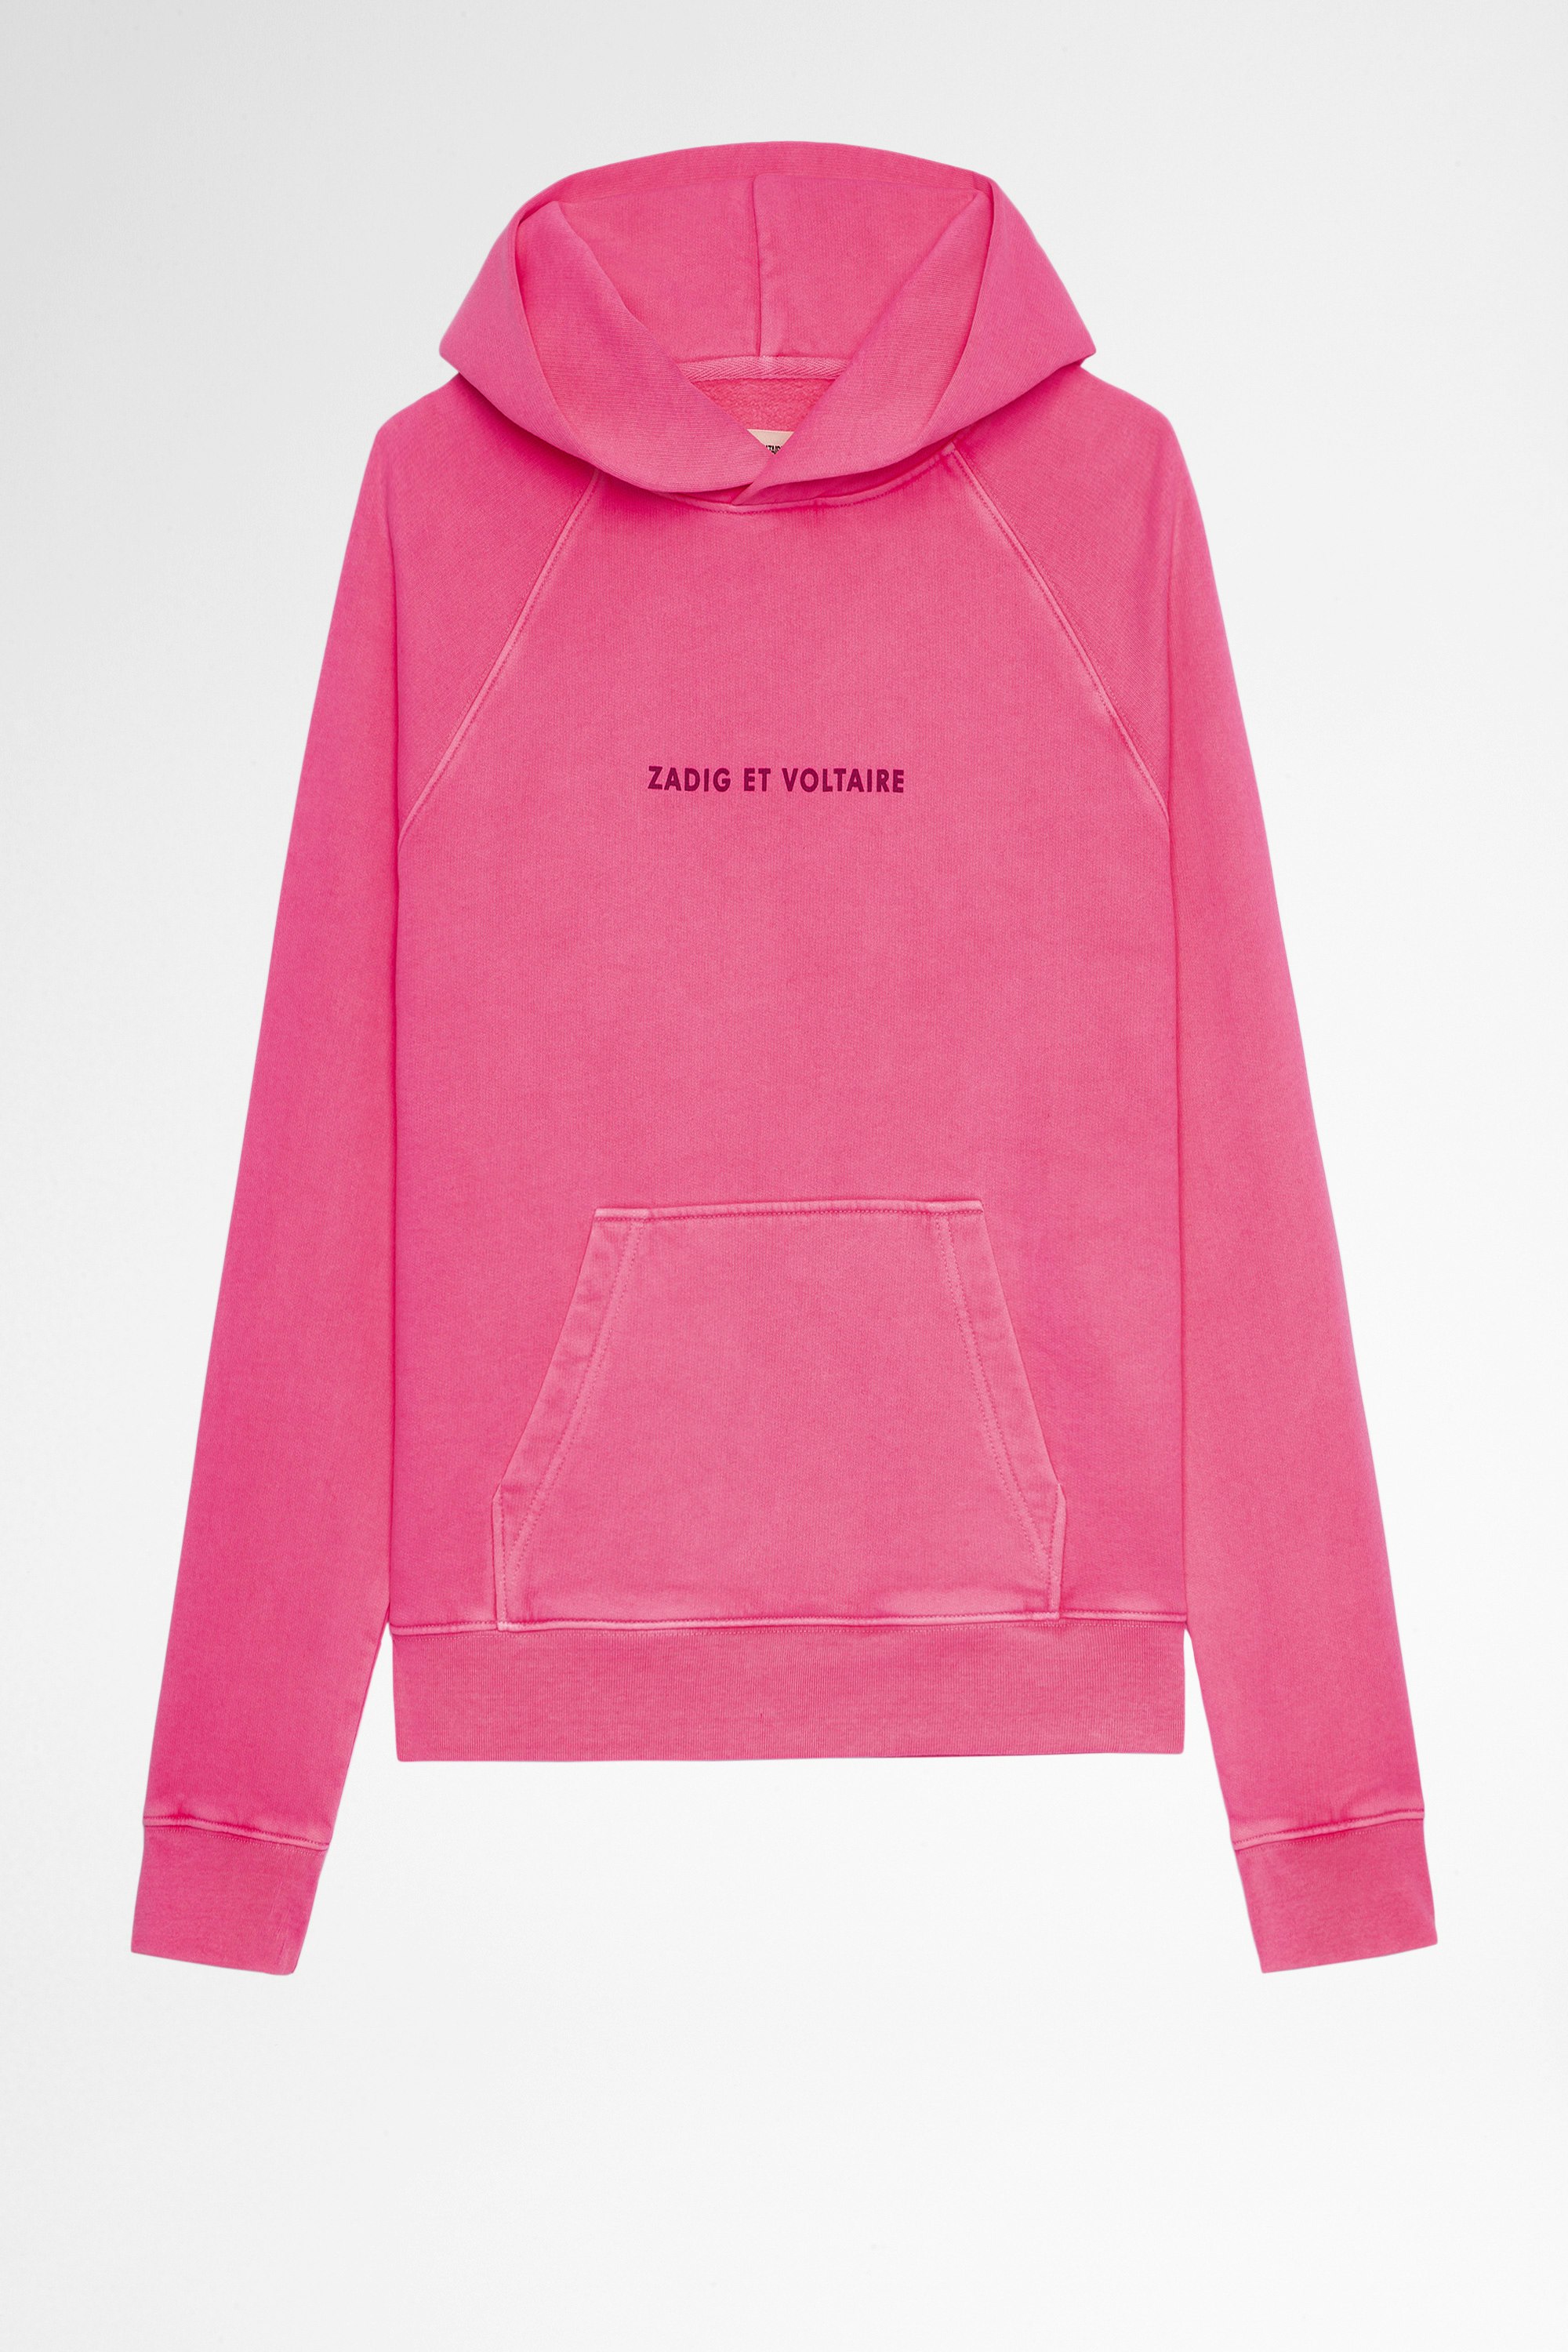 Georgy Happy スウェット Women’s pink cotton hoodie. Made with fibers from organic farming.